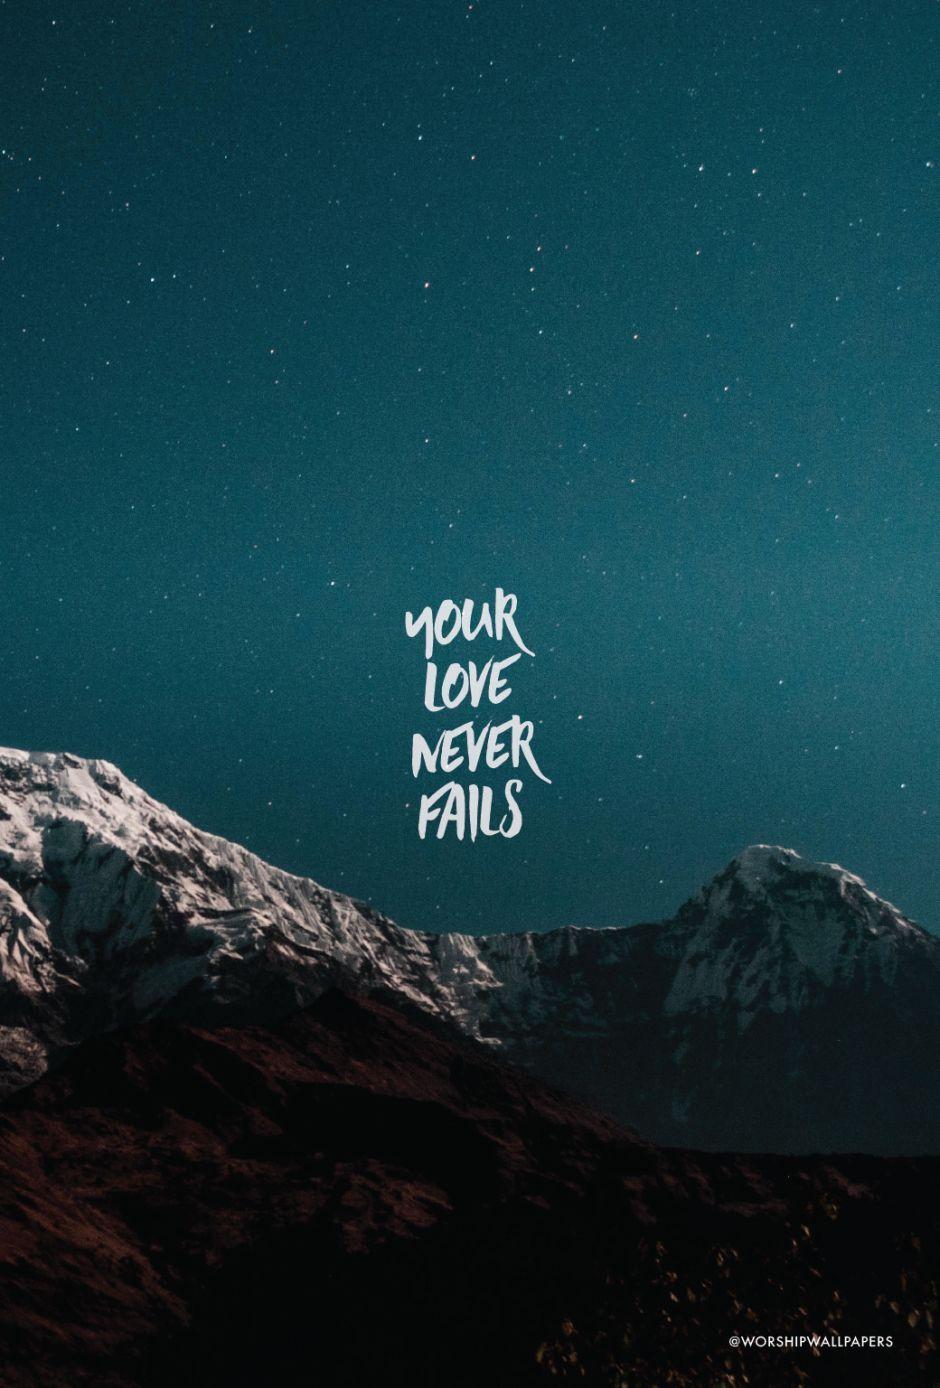 Your Love Never Fails by Jesus Culture // Phone screen format